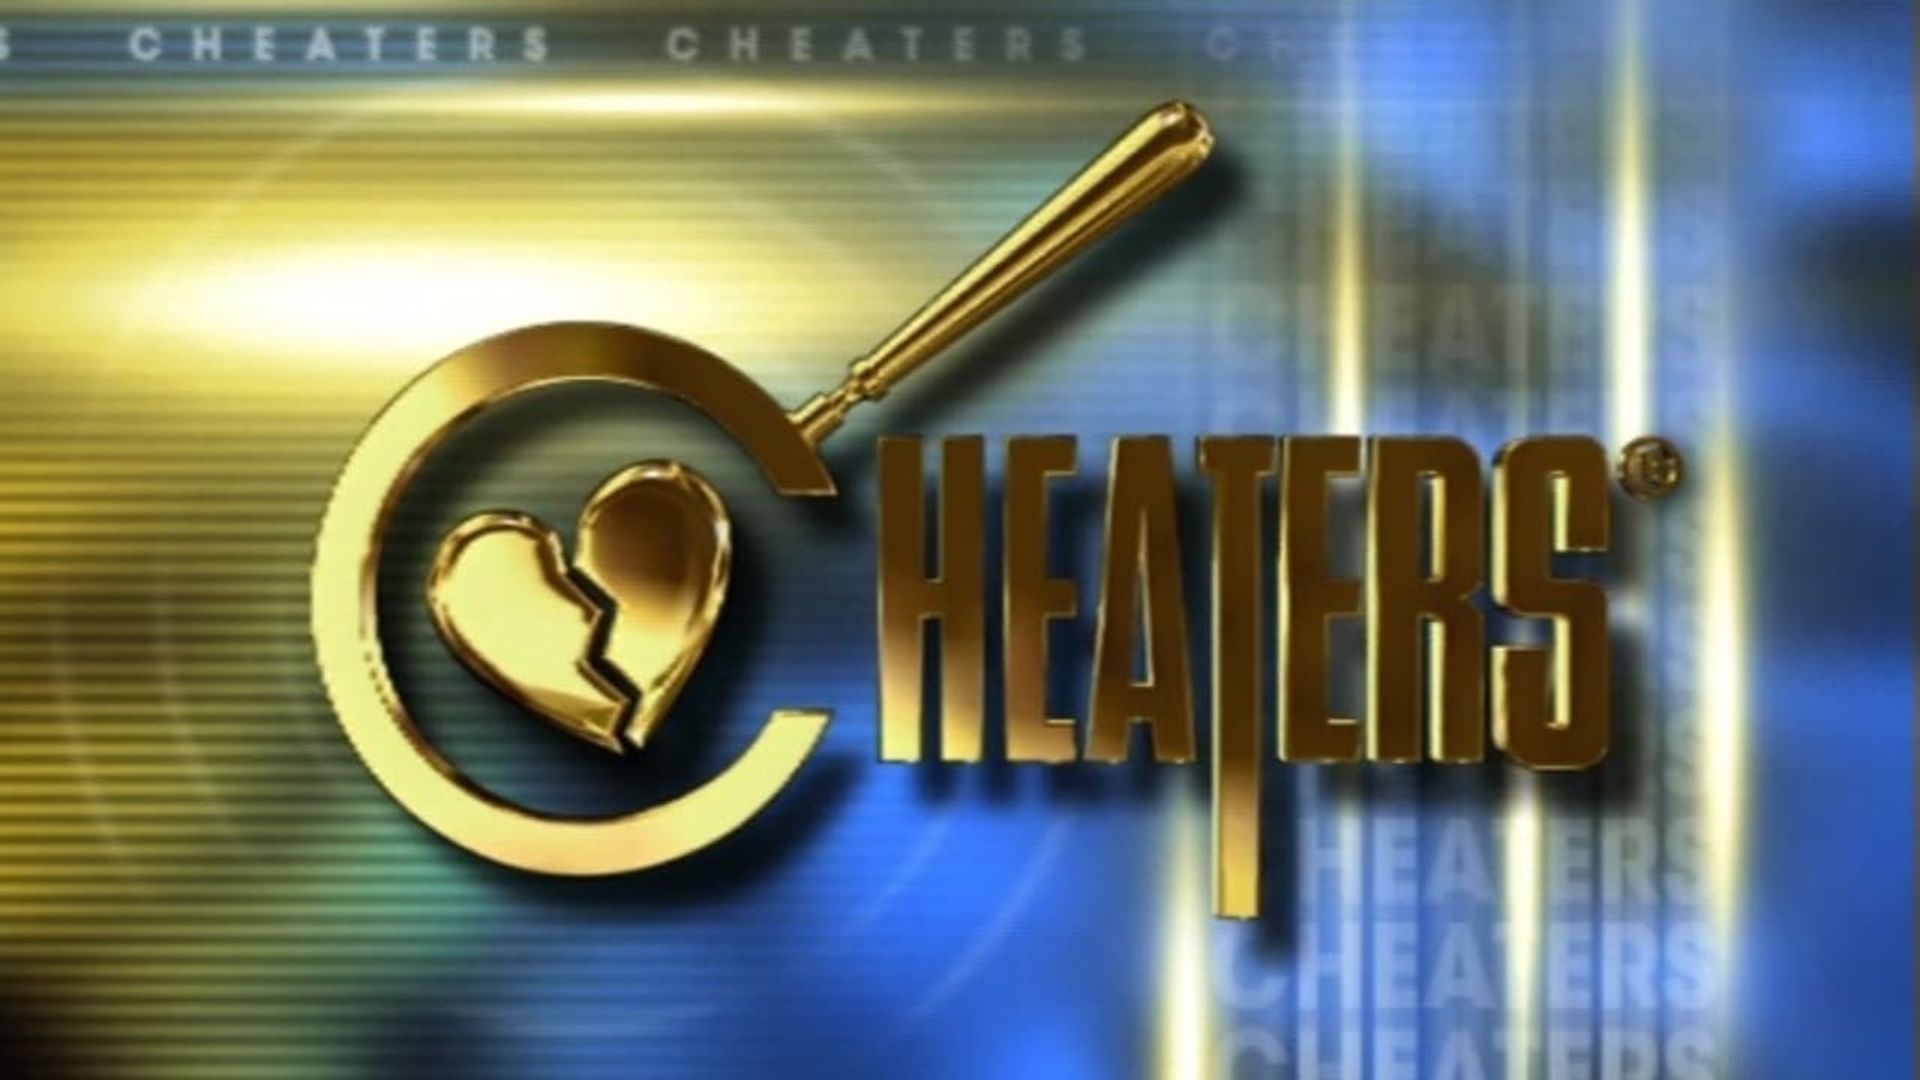 Cheaters background